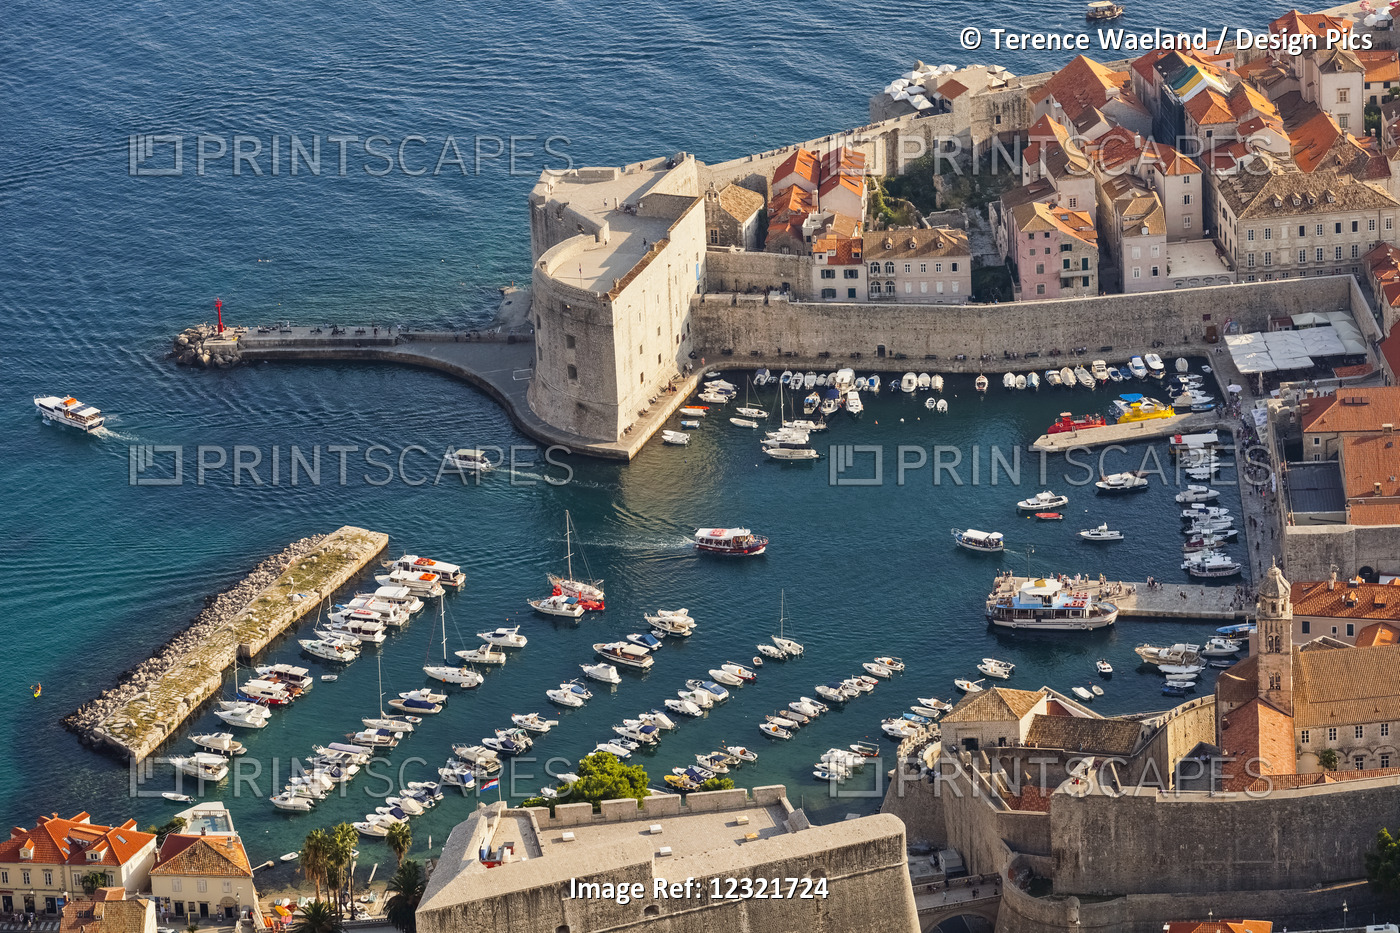 View Of Port And Rooftops; Dubrovnik, Croatia